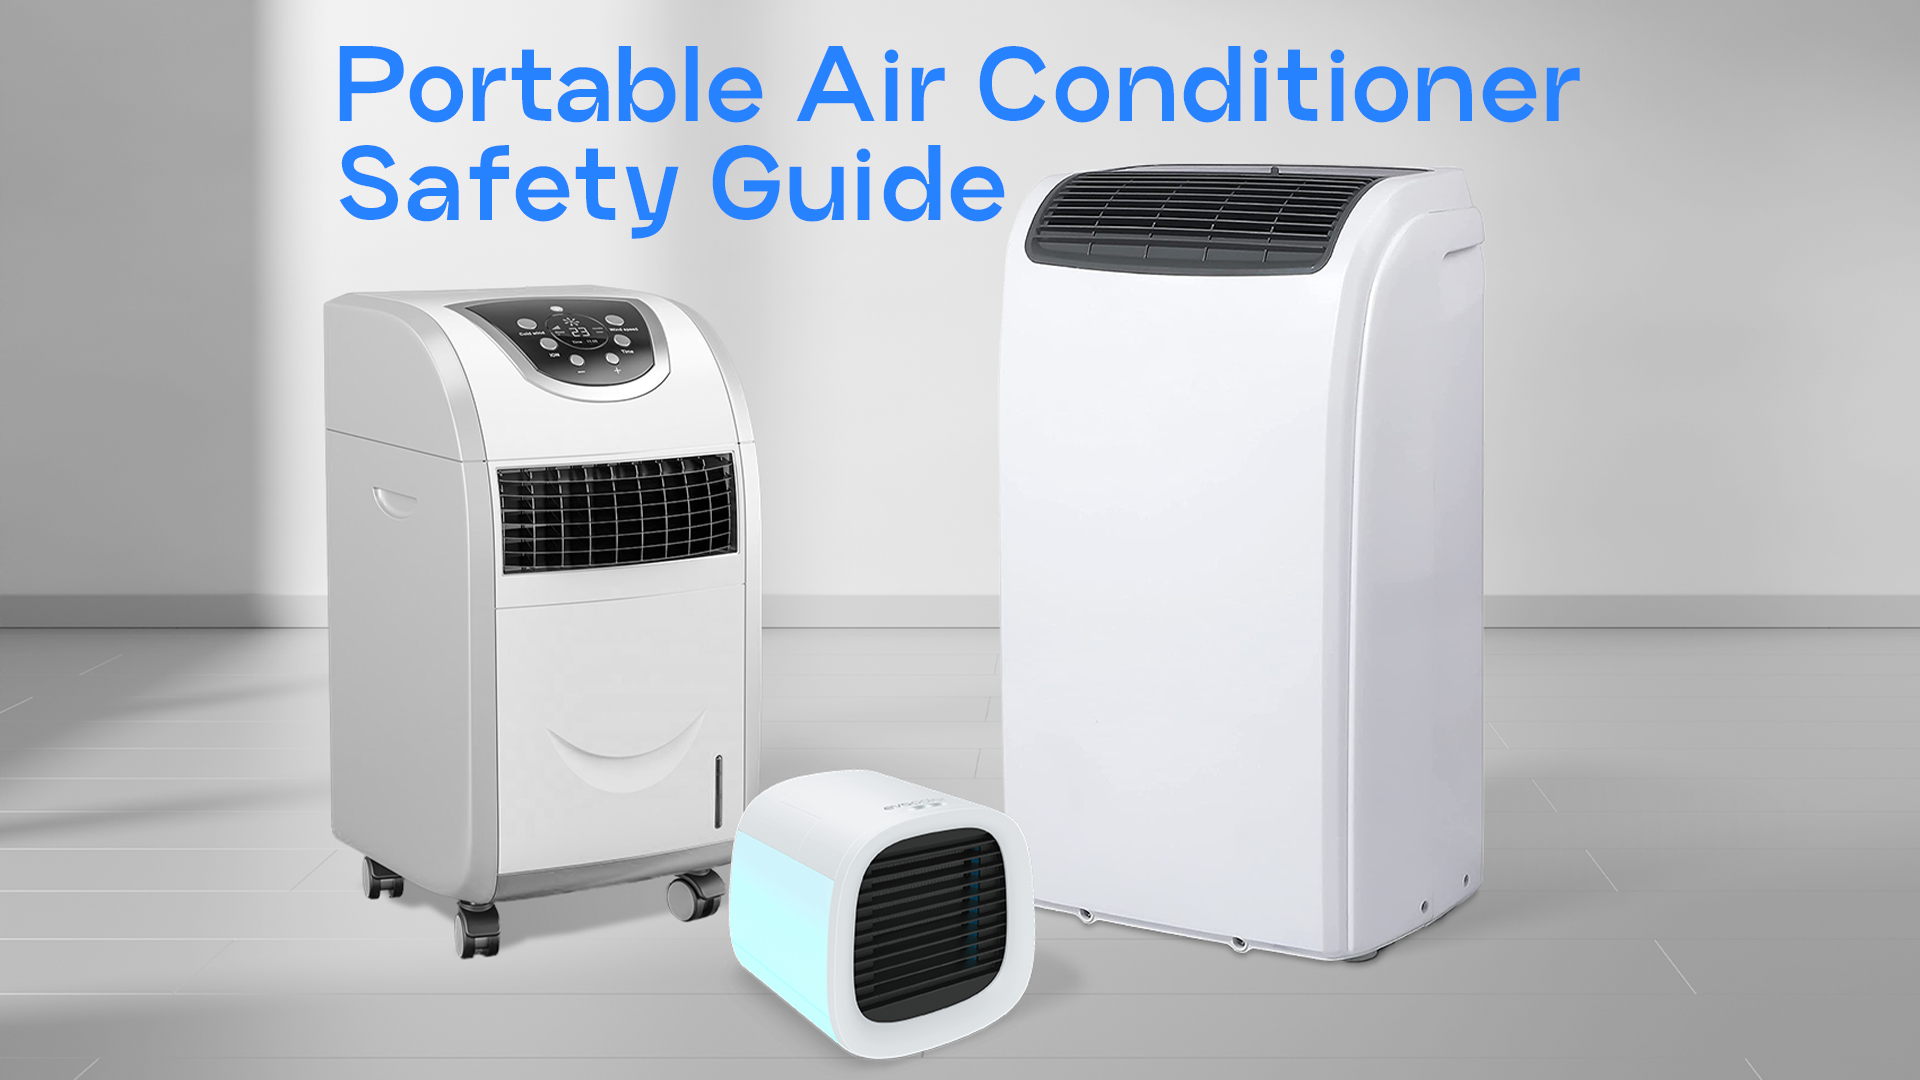 Portable Air Conditioner Safety Guide